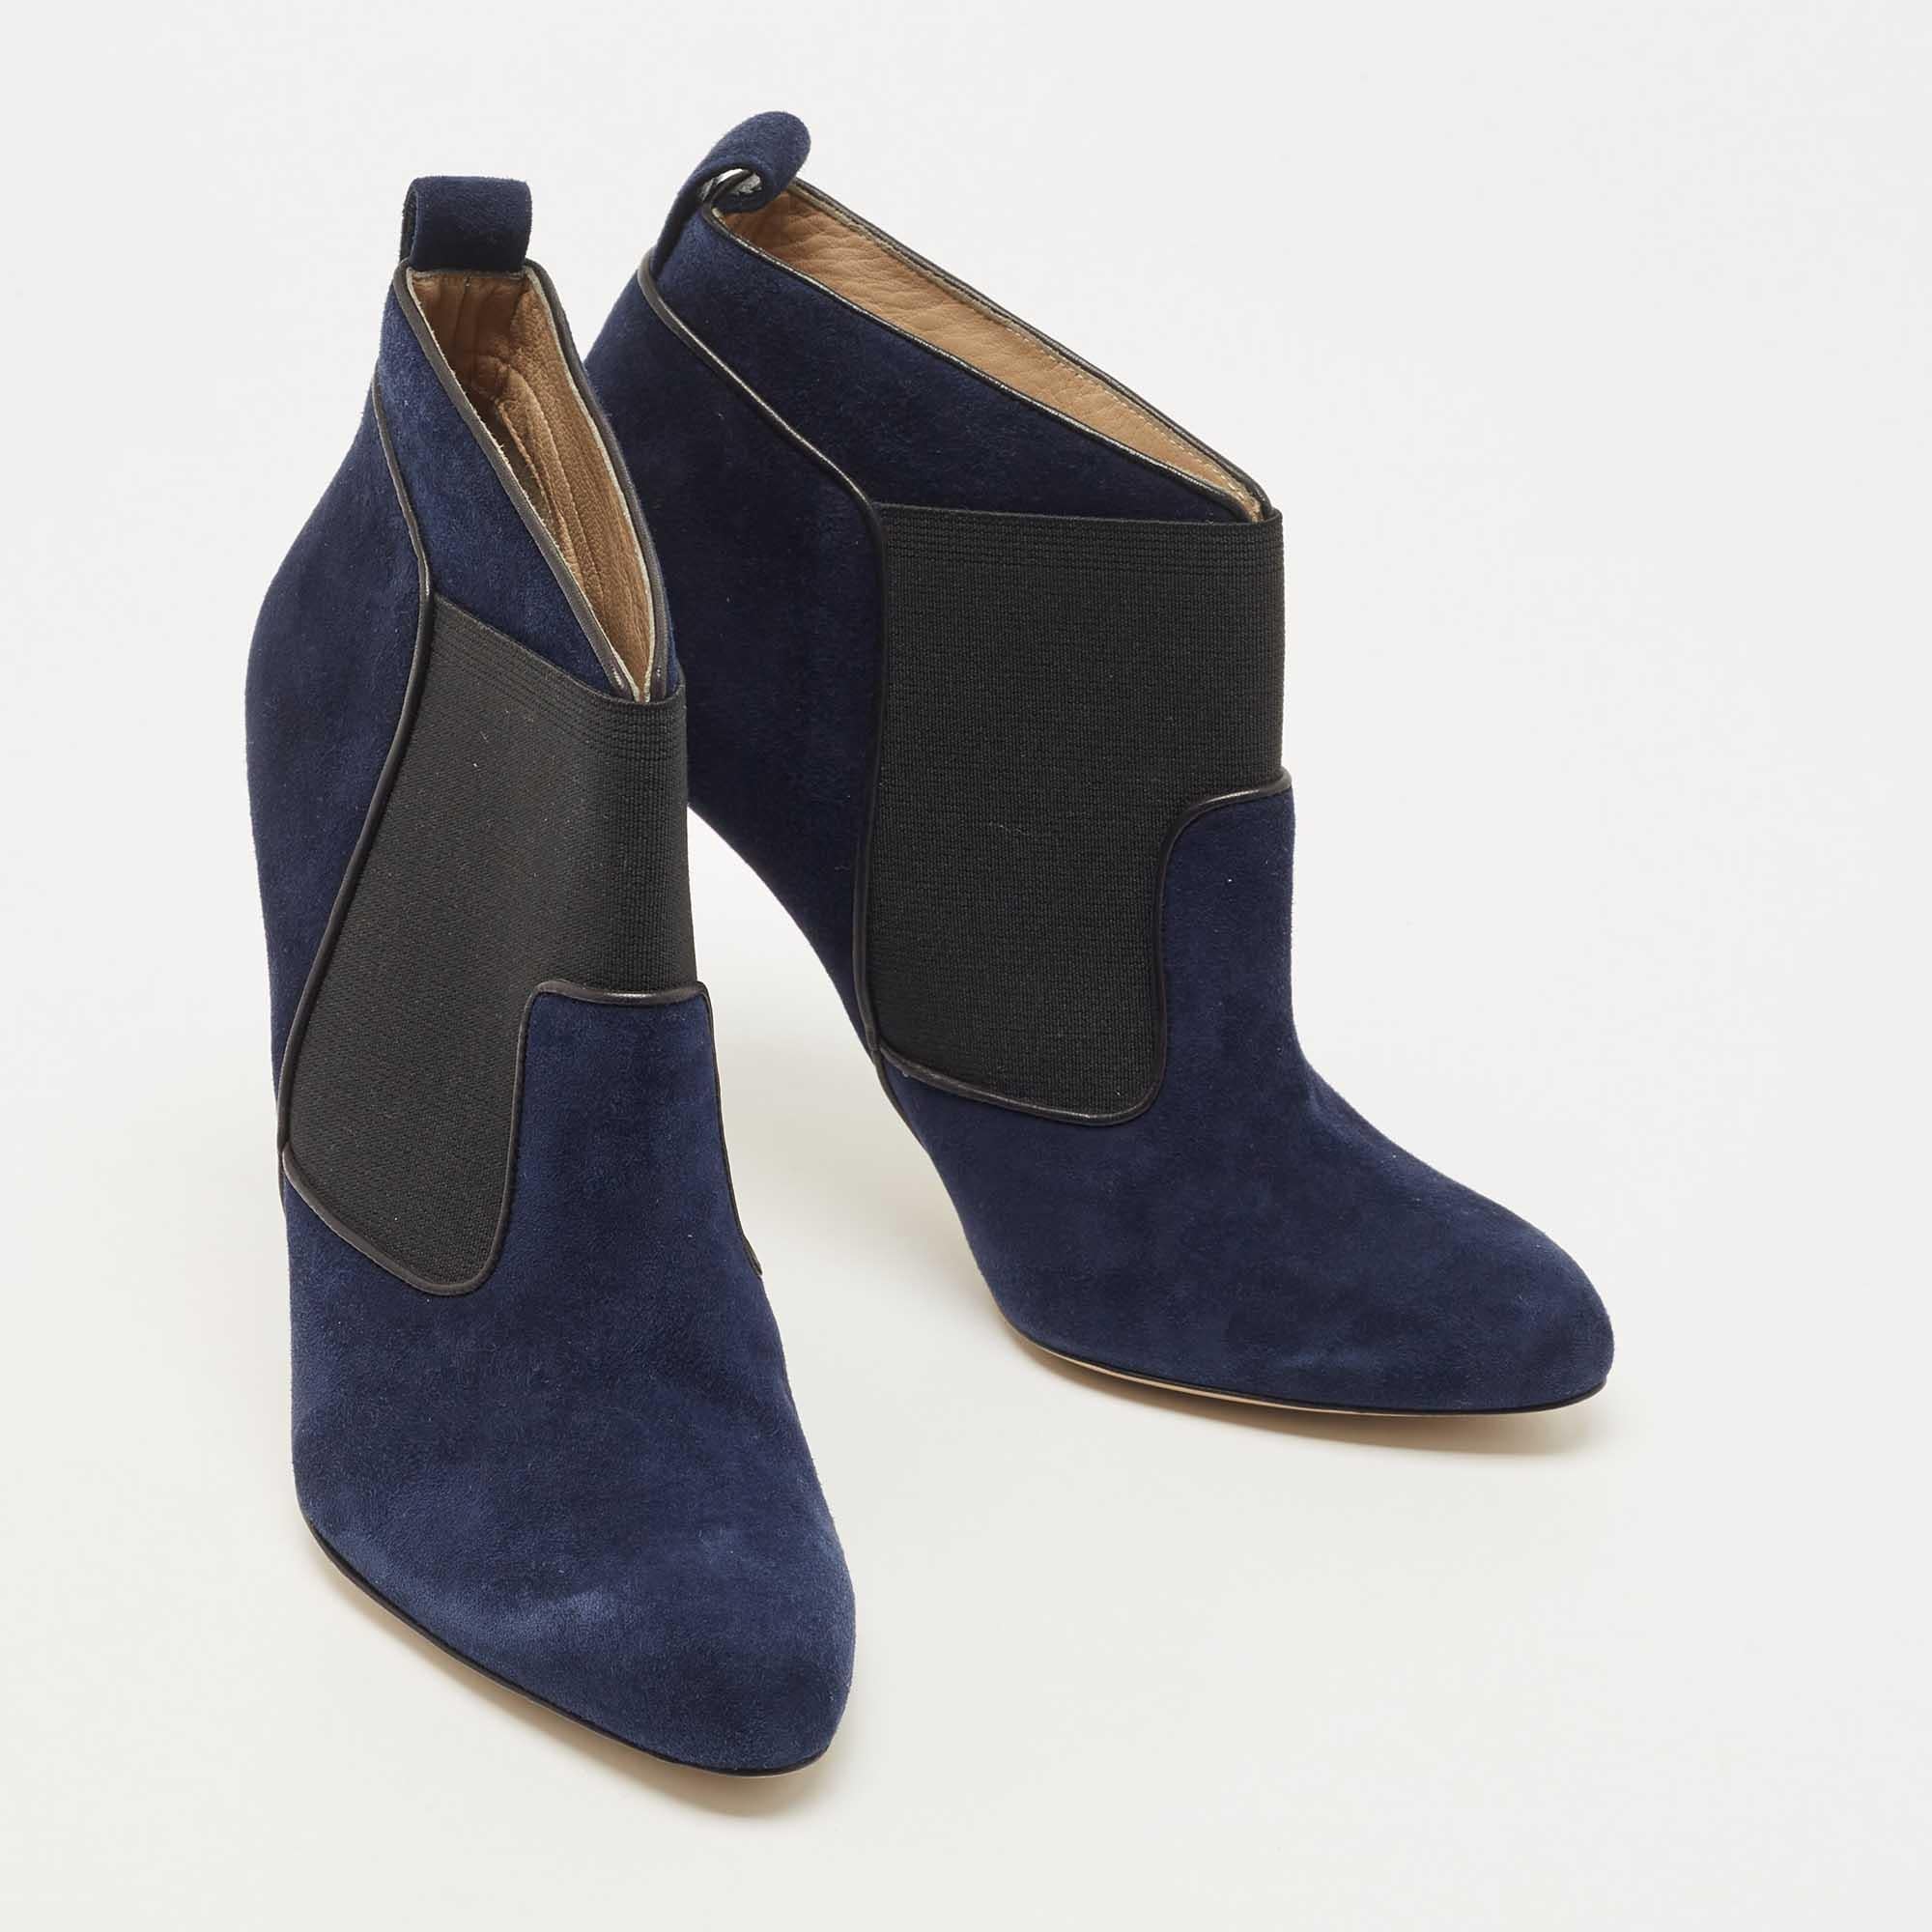 Paul Andrew Navy Blue Suede Ankle Length Boots Size 39 In Excellent Condition For Sale In Dubai, Al Qouz 2